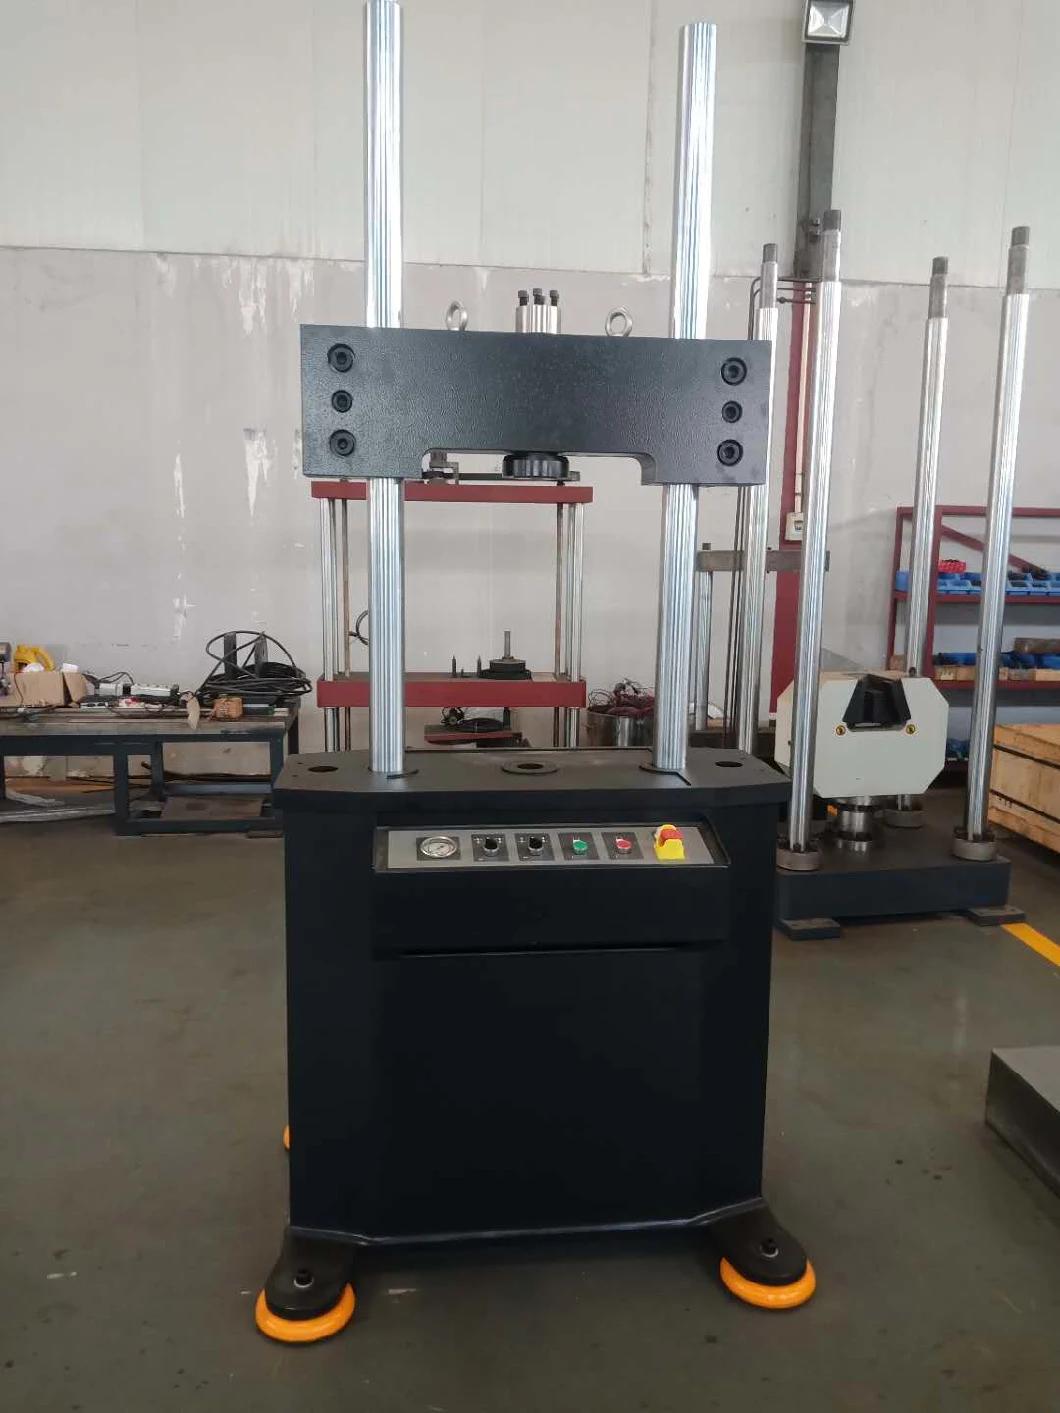 Factory Direct High-Precision Manufacturing Pws-25 Dynamic Fatigue Testing Machine for Laboratory